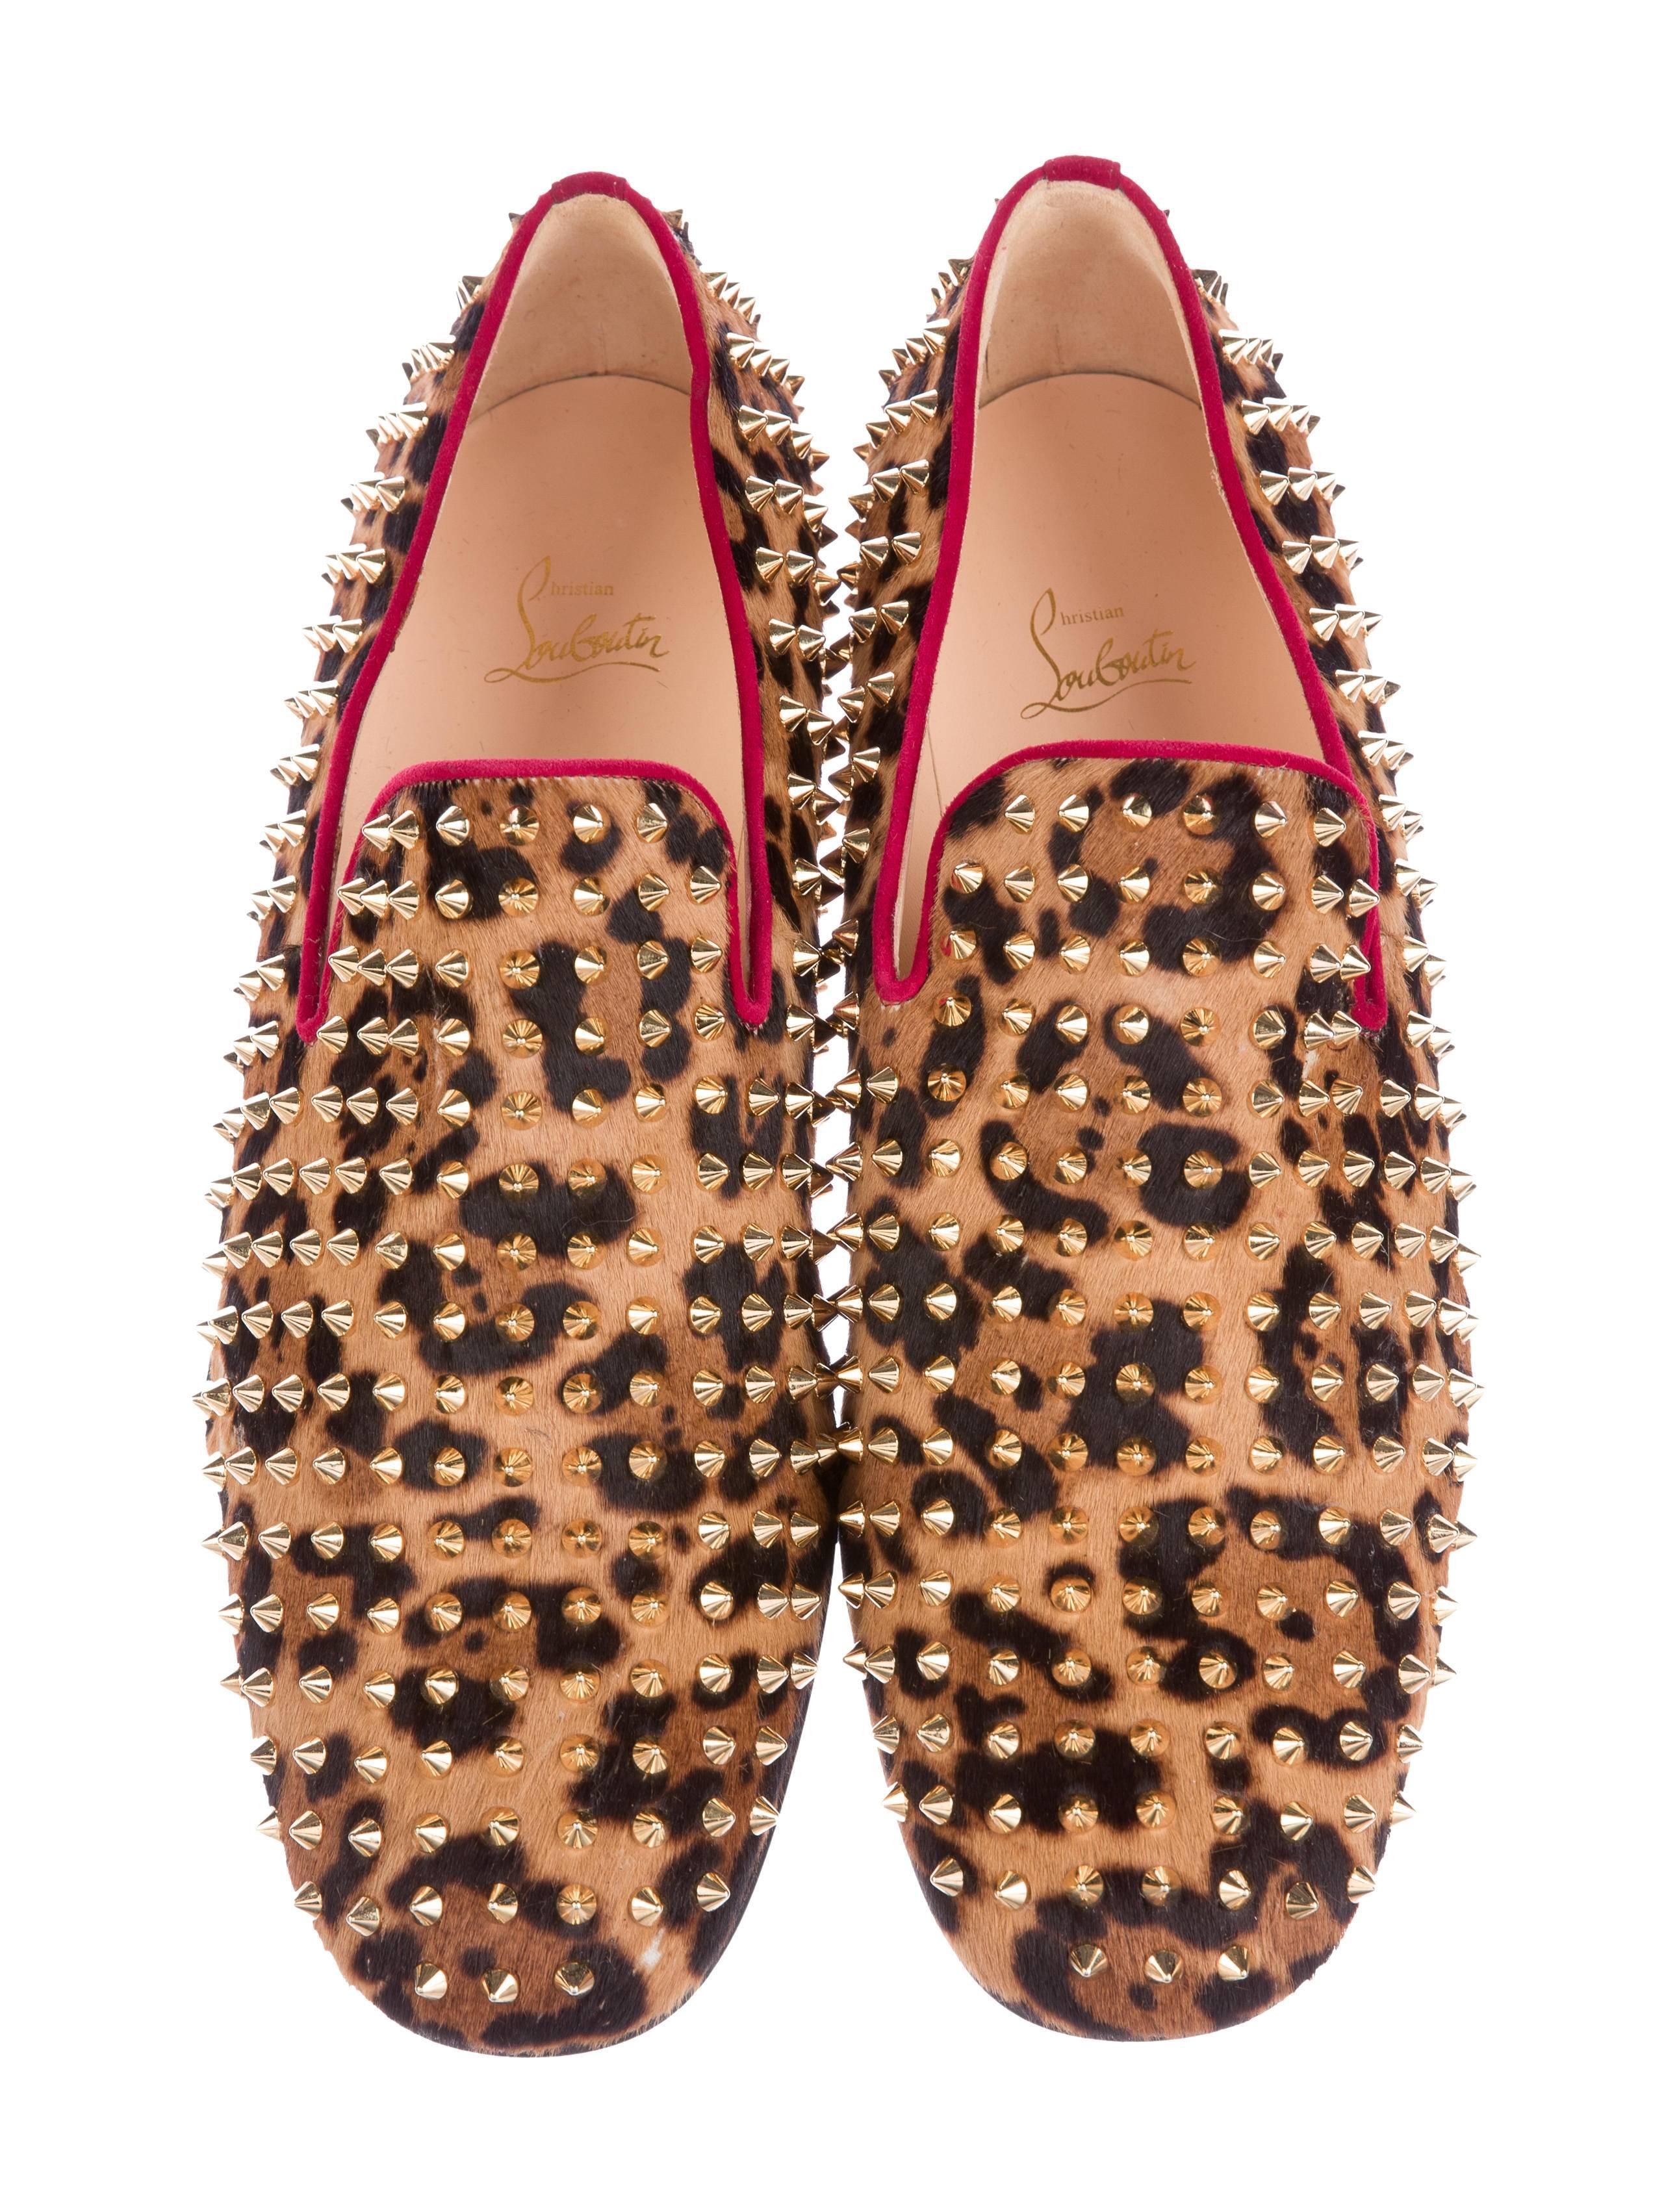 CURATOR'S NOTES

Christian Louboutin NEW Men's Leopard Calf Hair Stud Smoking Slipper Shoes Loafers available in Newfound Luxury

Size EU 46 (US 13)
Calf hair
Metal
Gold tone hardware
Slip on
Made in Italy
Heel height 1